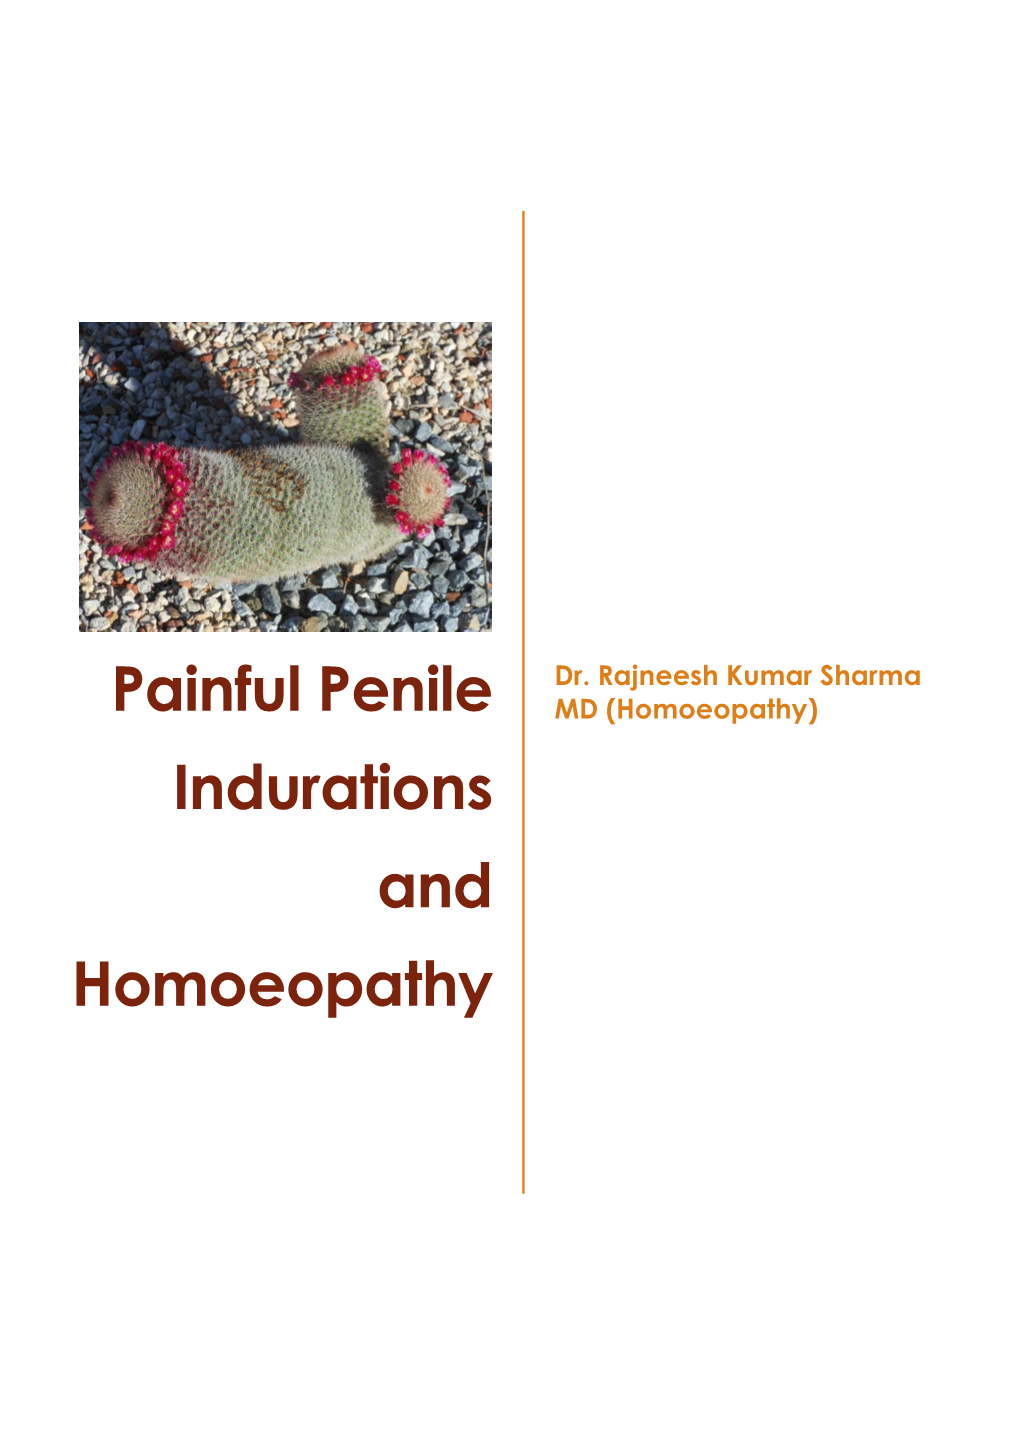 Painful Penile Indurations and Homoeopathy